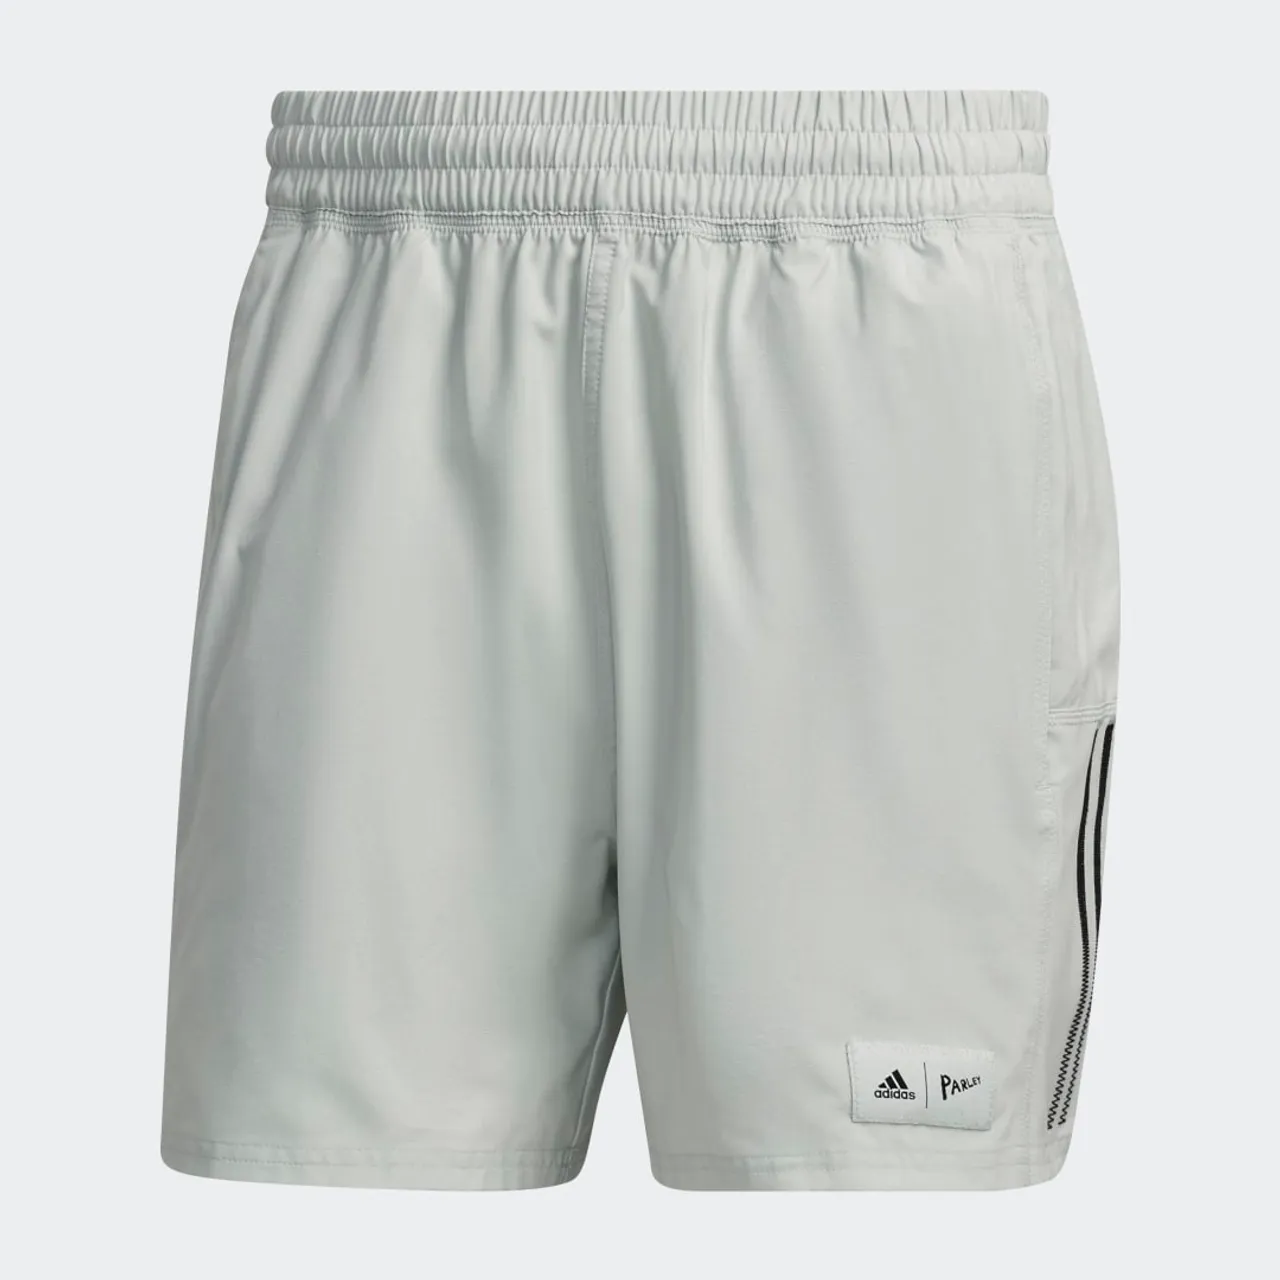 Parley Run for the Oceans Shorts